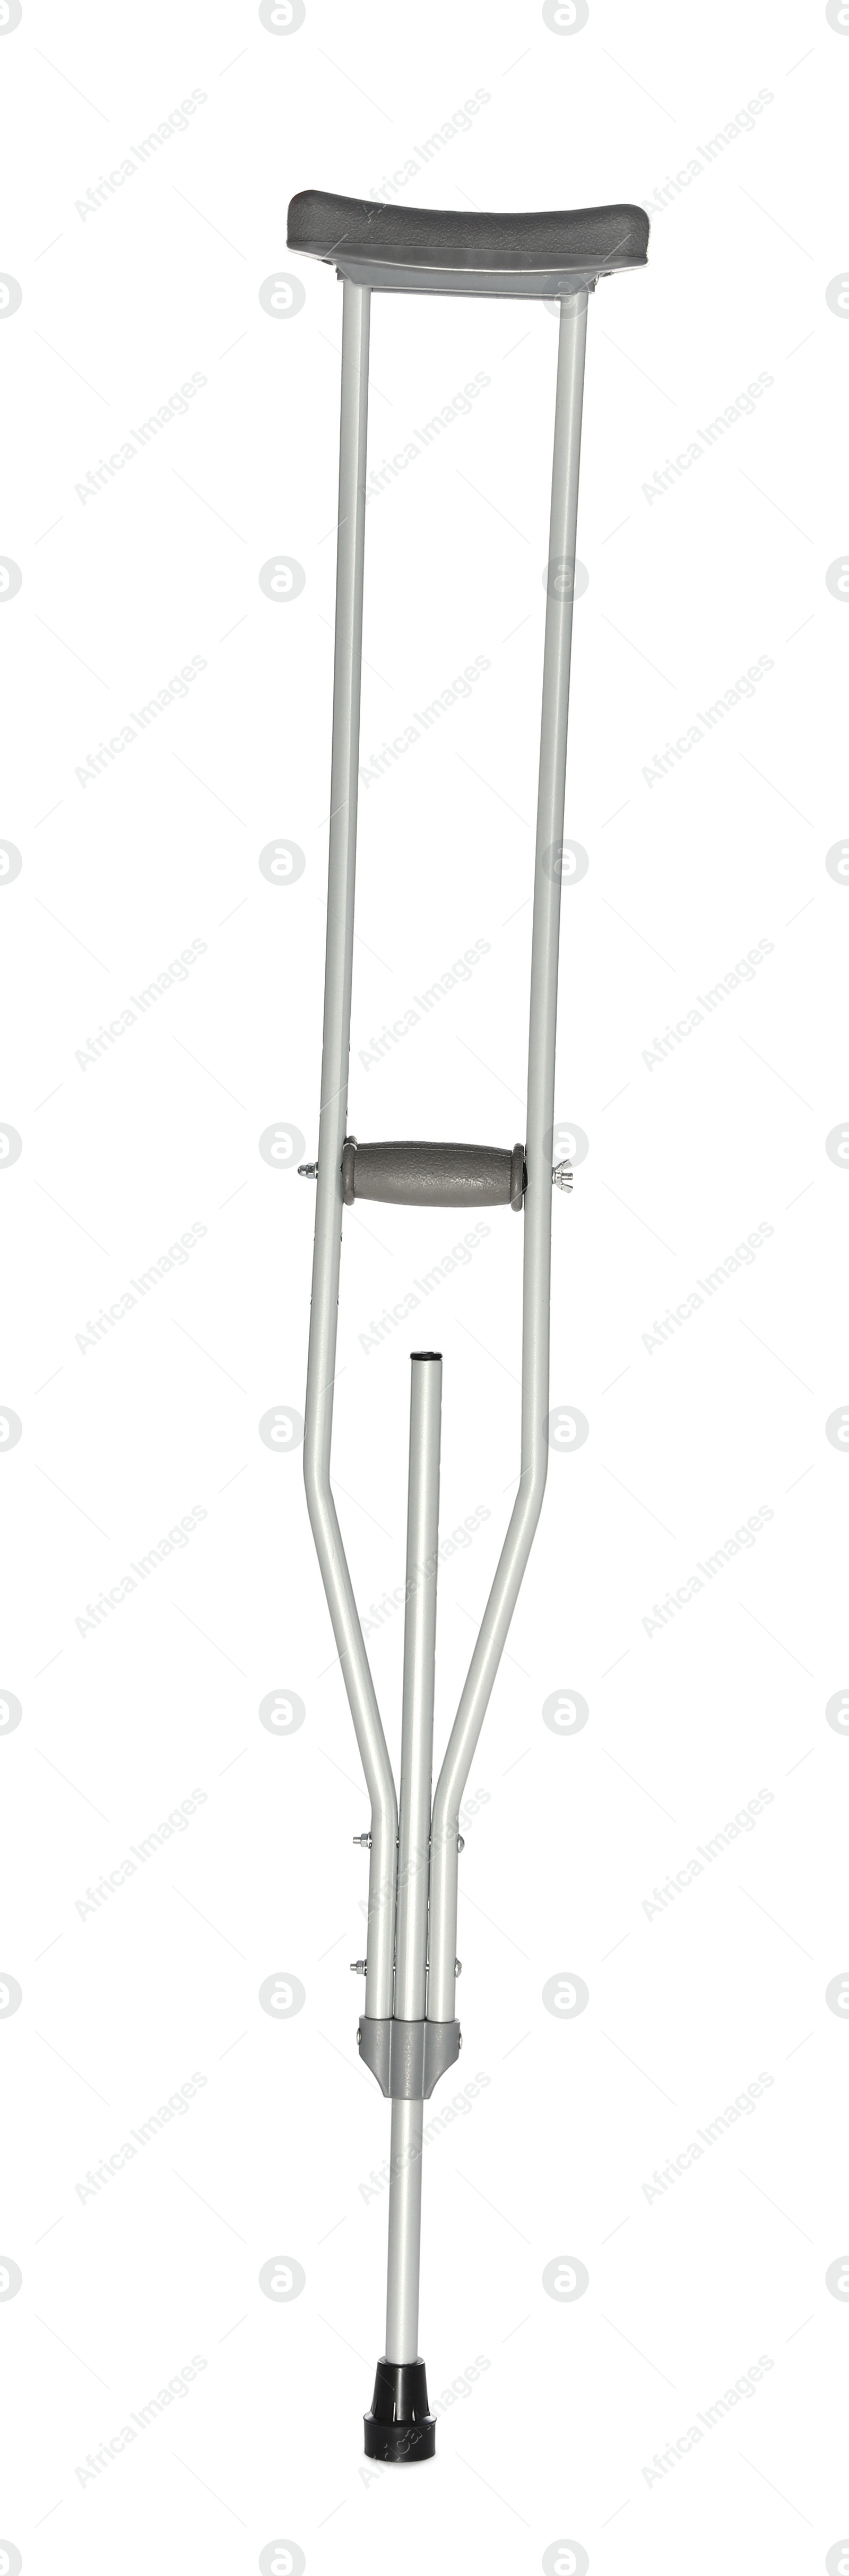 Photo of New adjustable axillary crutch isolated on white